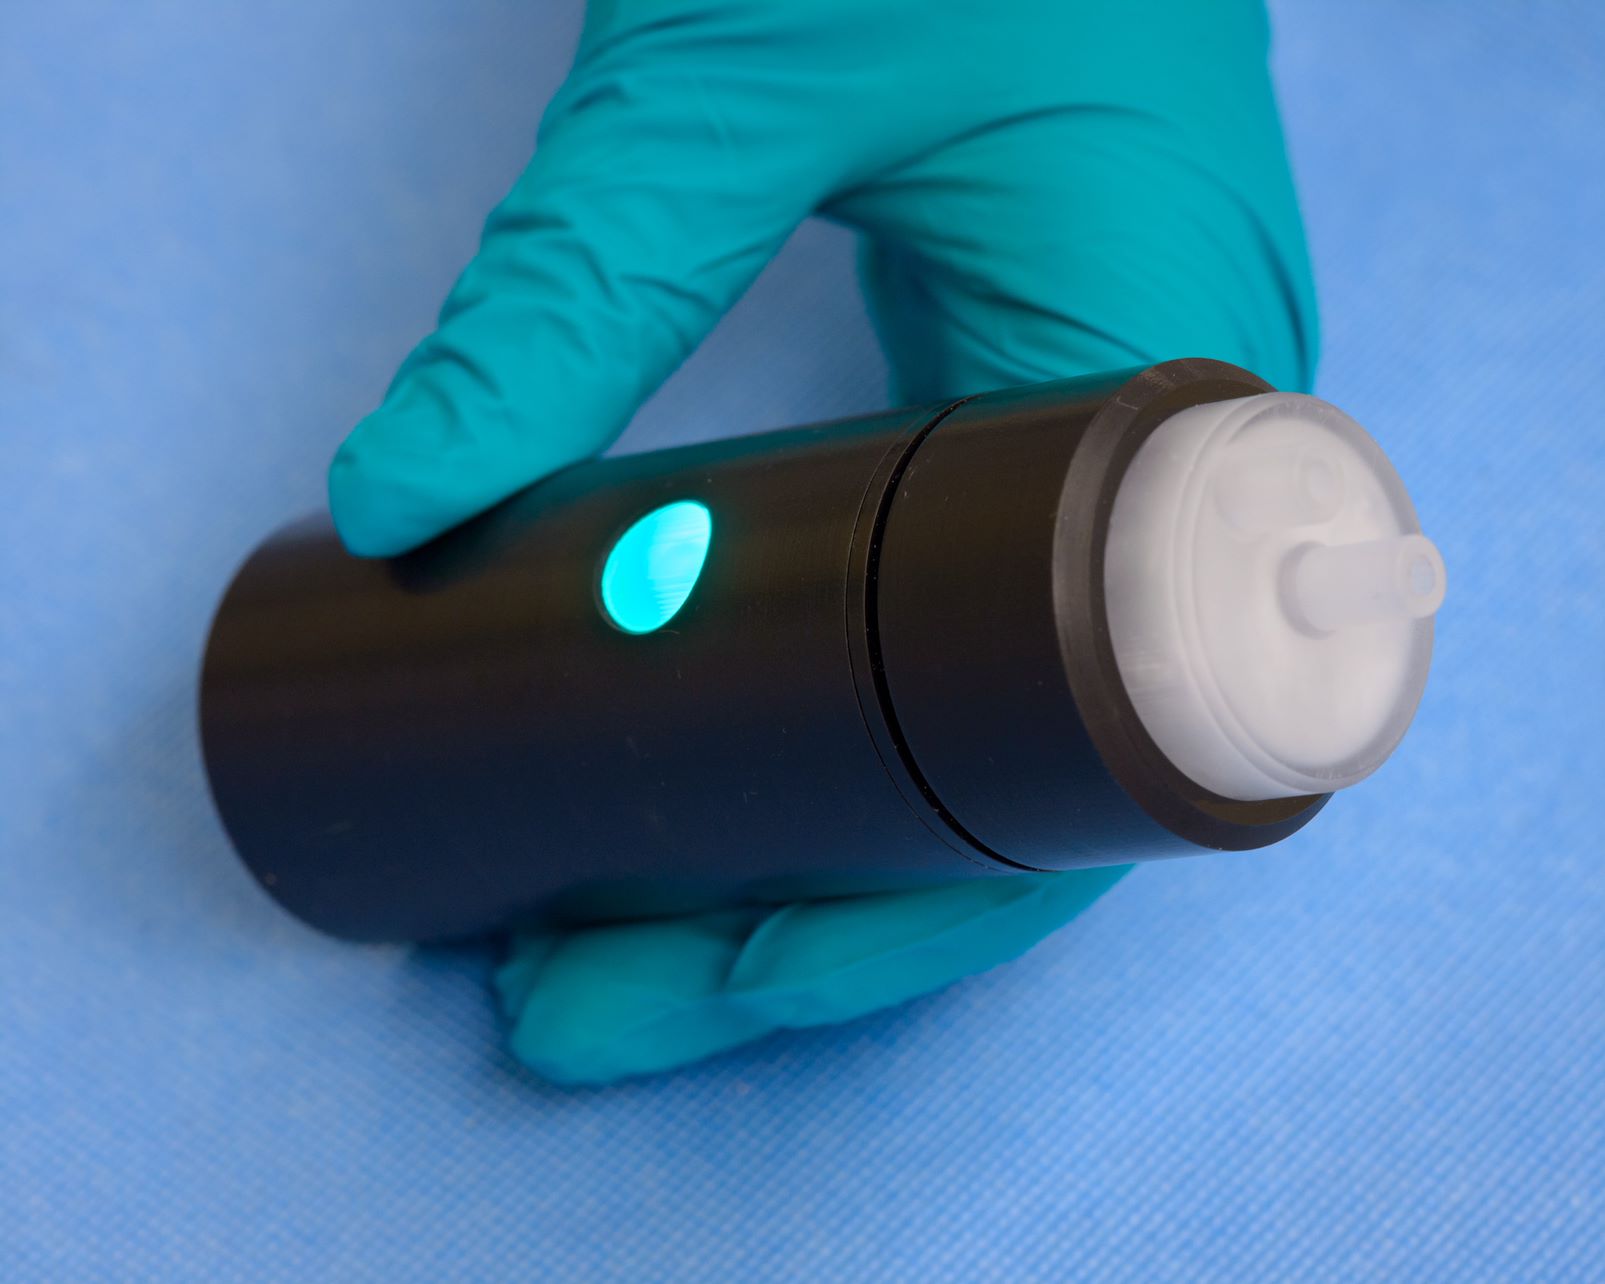 A bottle-like device, with a blue light at the center and a nozzle at the top.